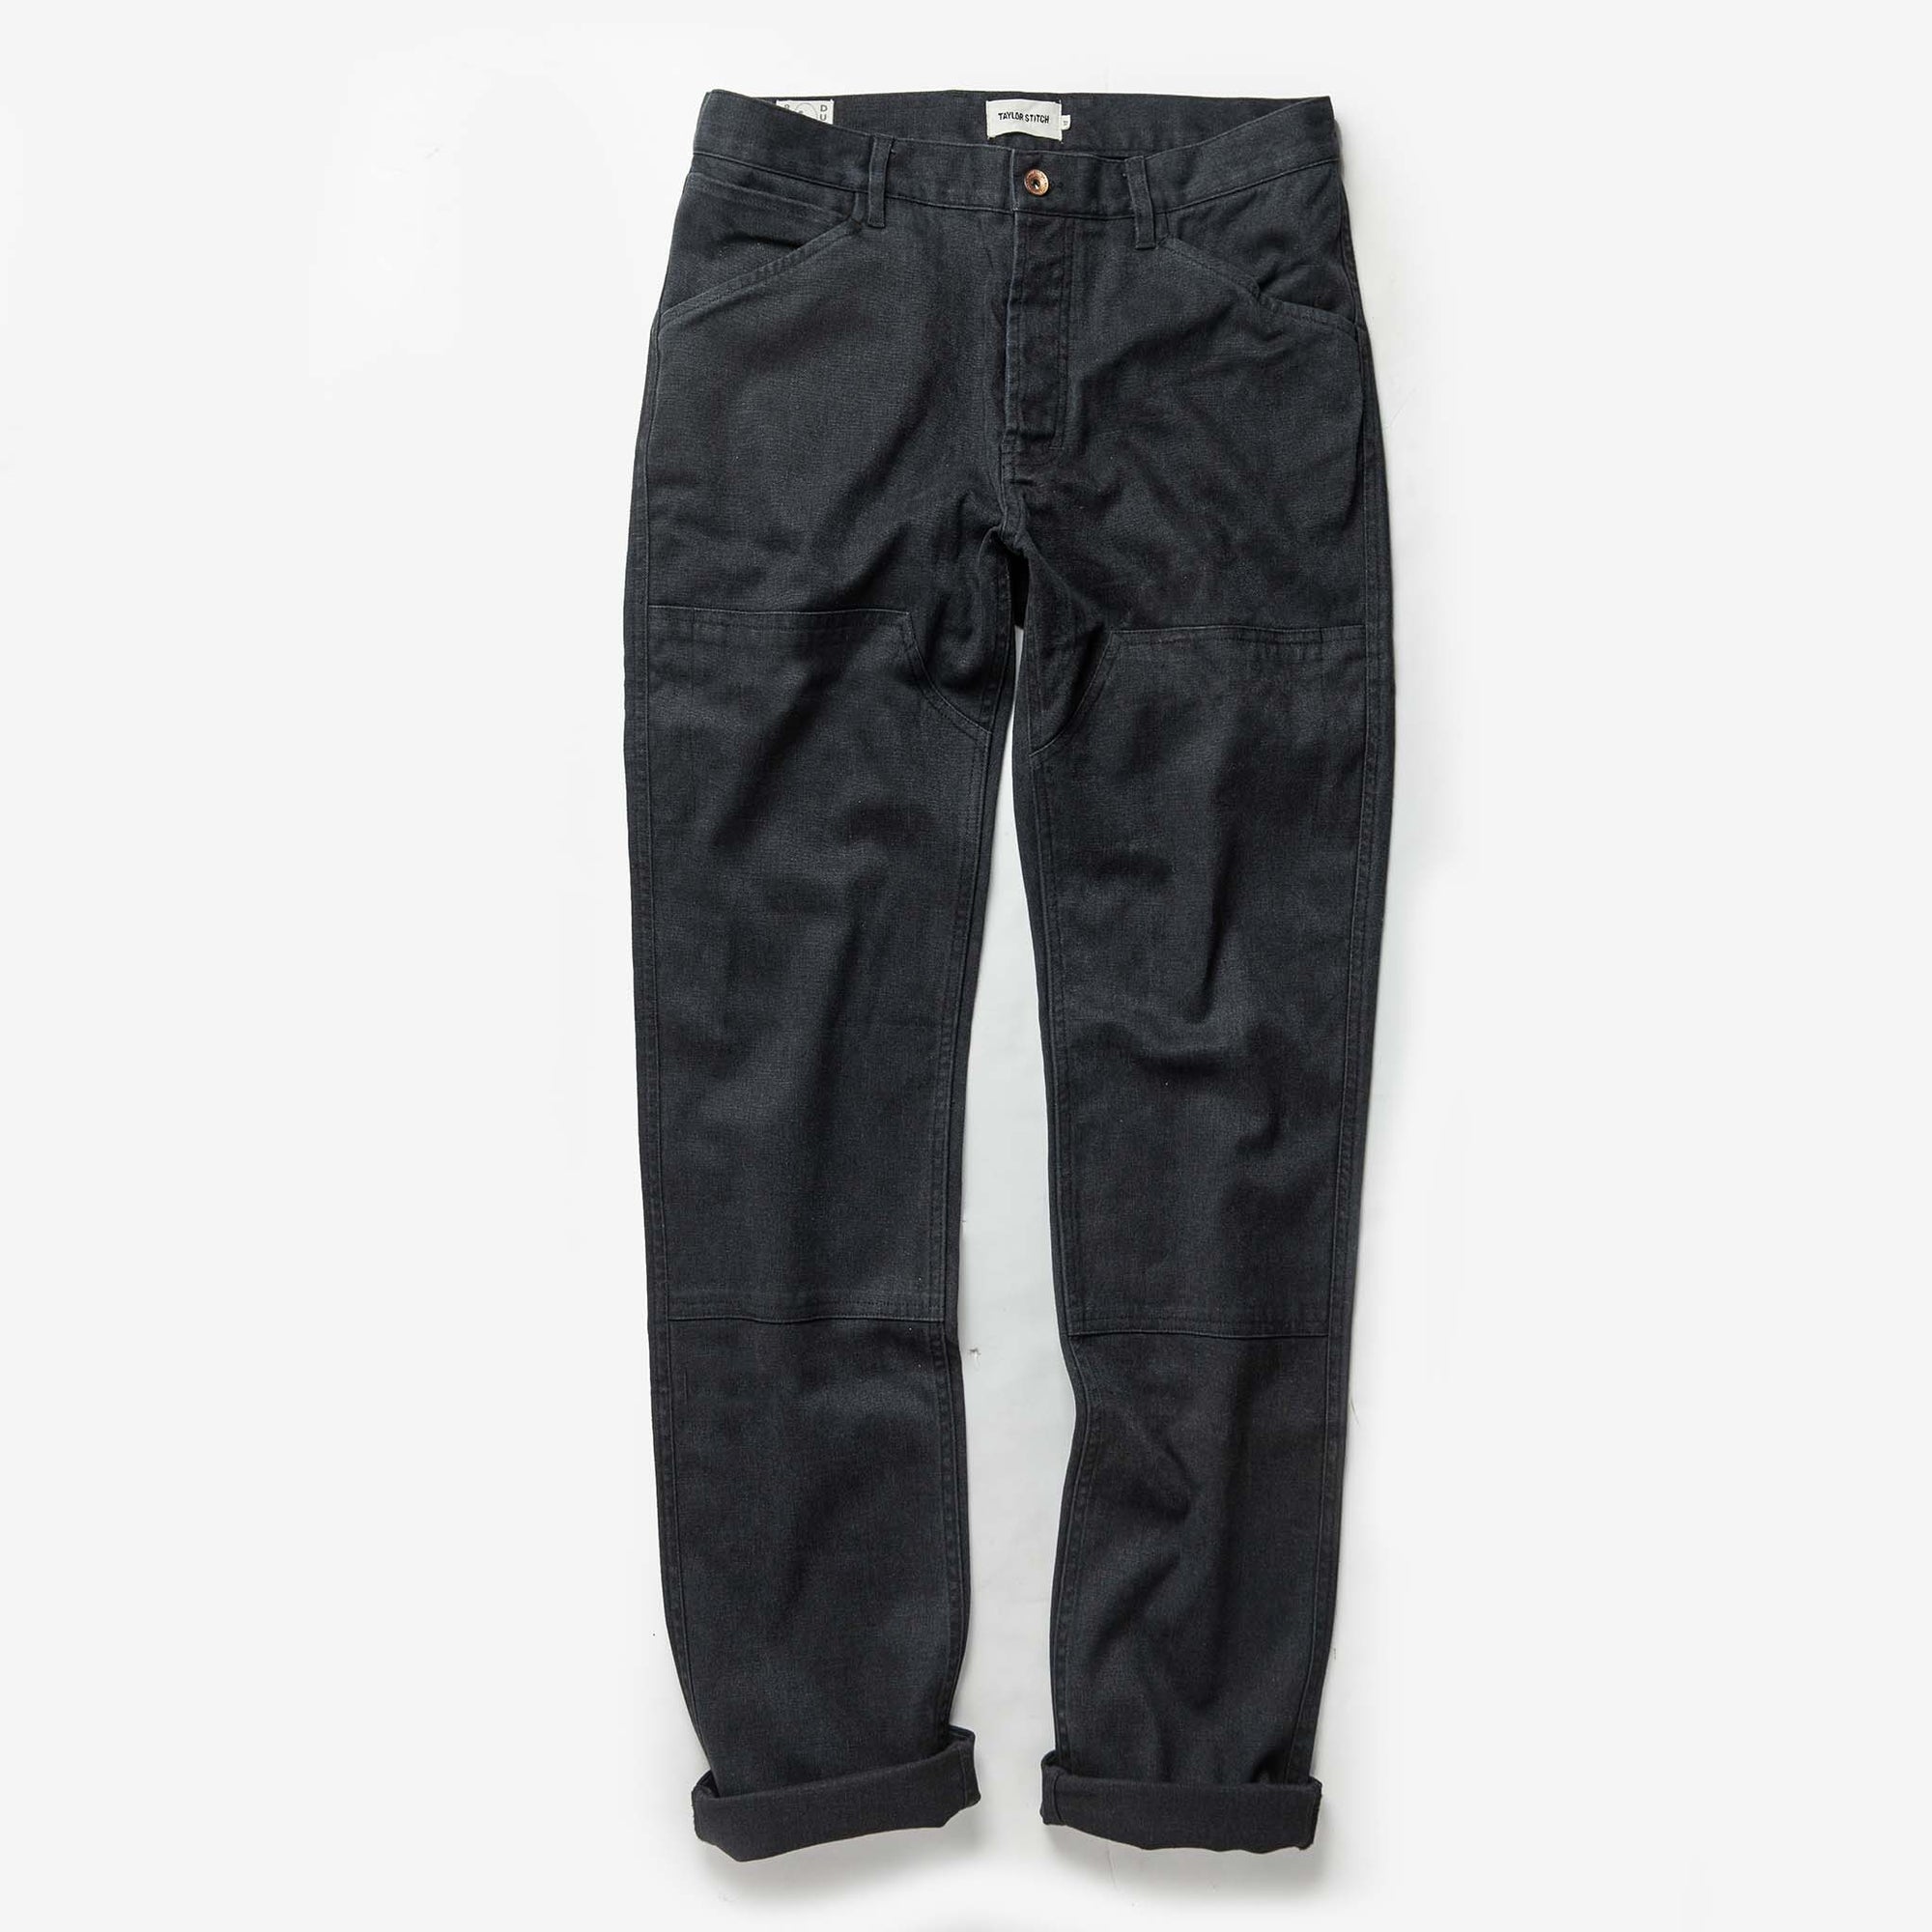 Taylor Stitch Chore Pant in Coal Boss Duck